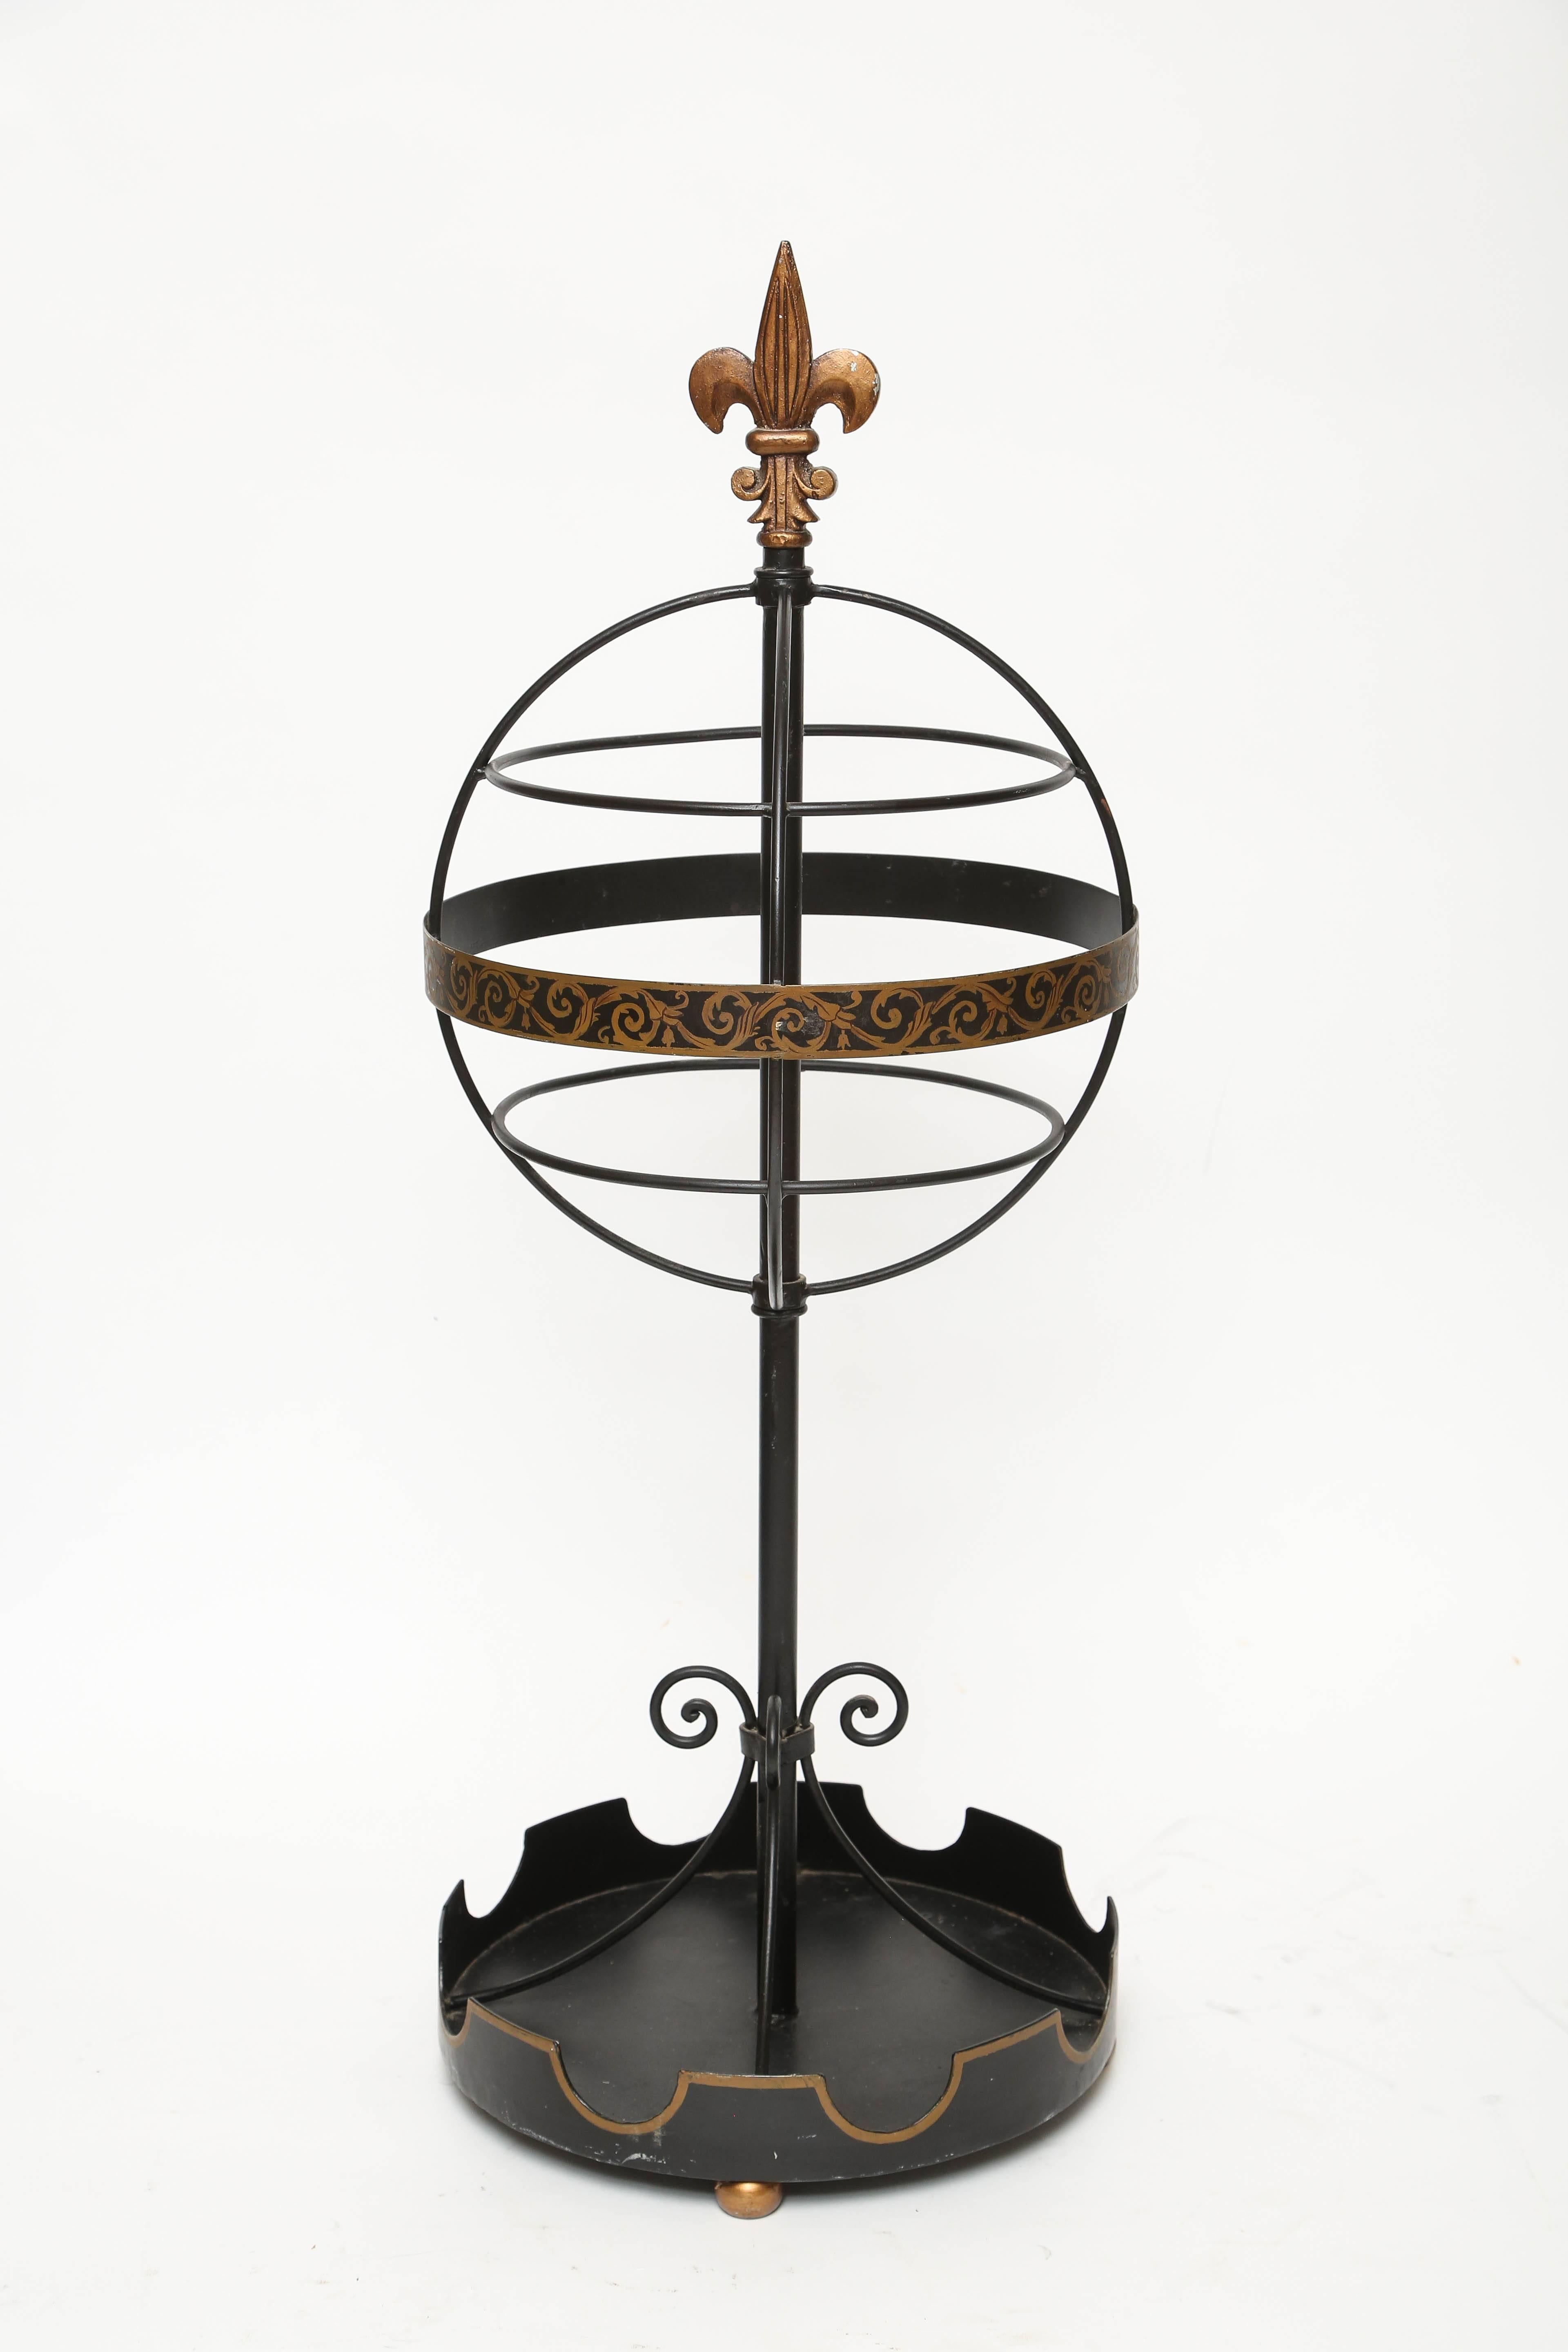 Charming French tole umbrella stand with sphere topped by a fleur de lys.